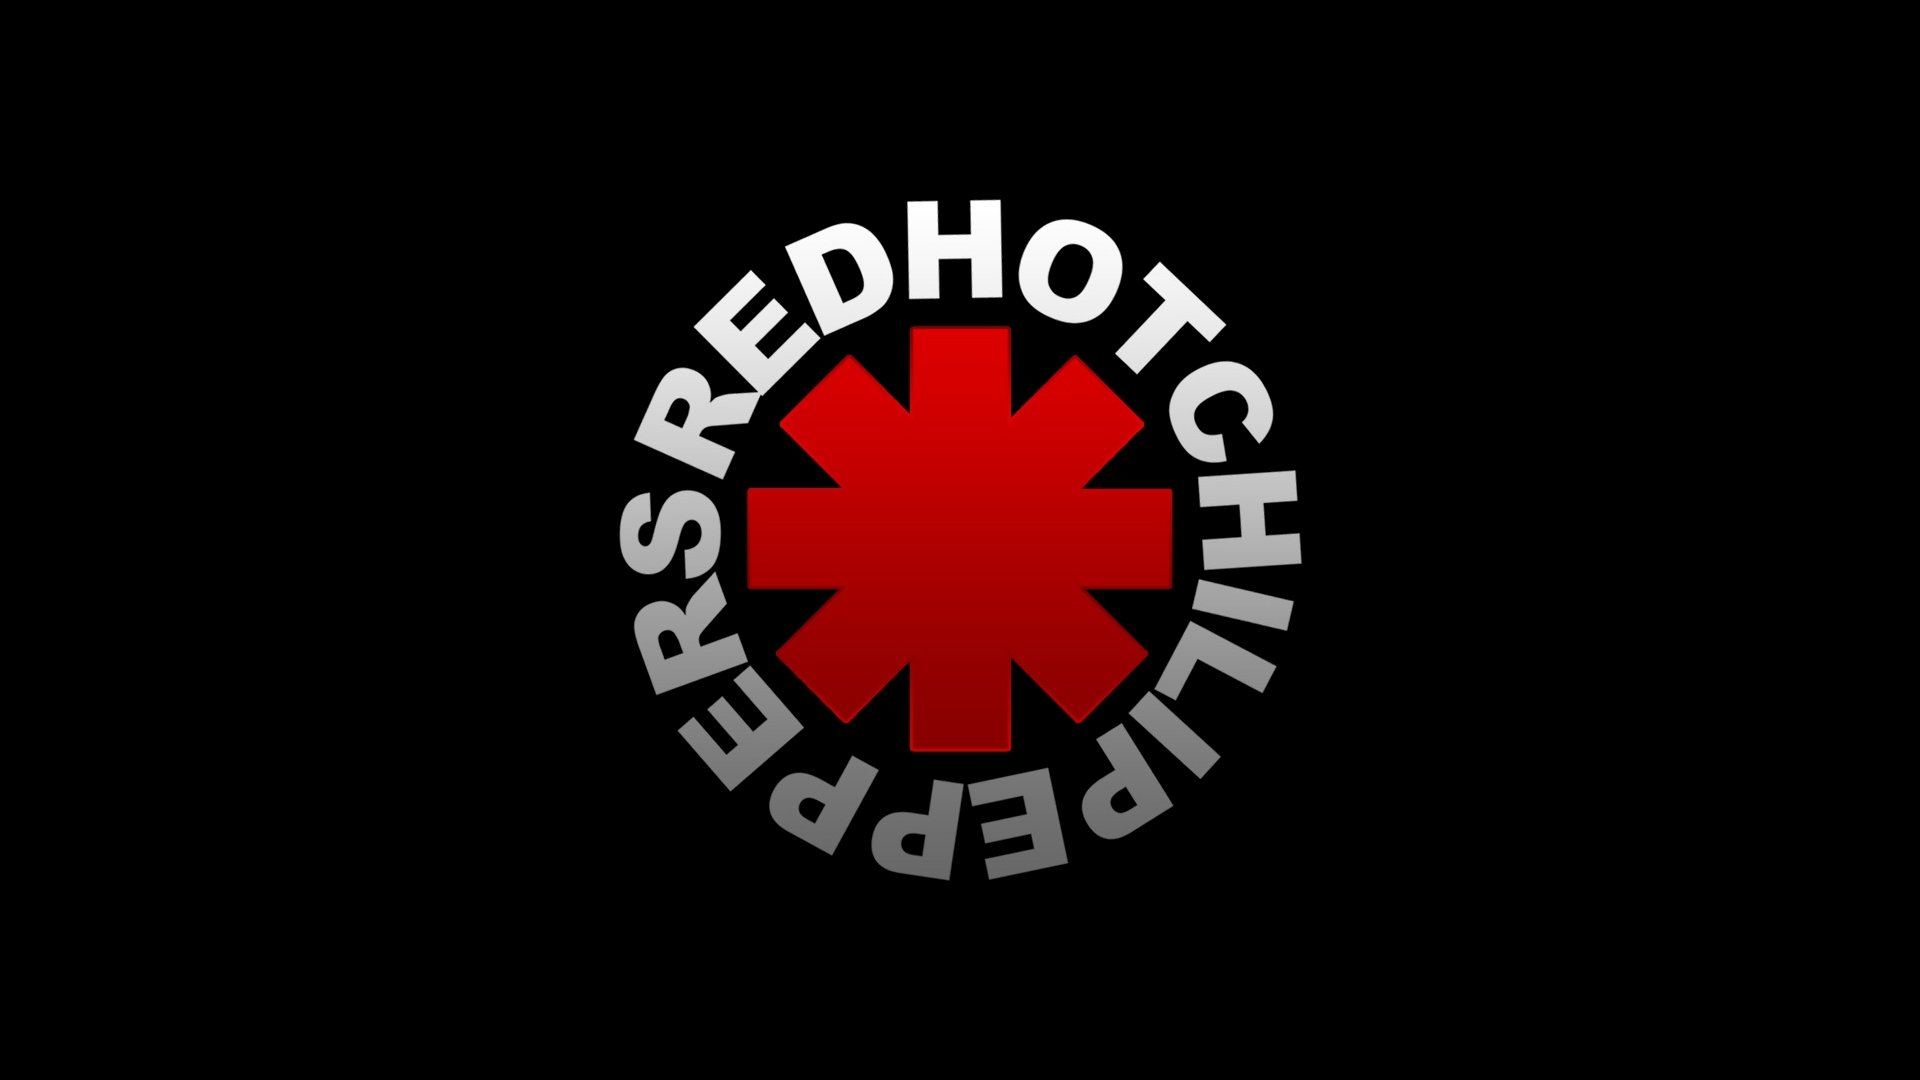 Red hot chili peppers necessities. Red hot Chili Peppers логотип группы. Red hot Chili Peppers знак. Ред хот Чили пеперс эмблема. RHCP знак.